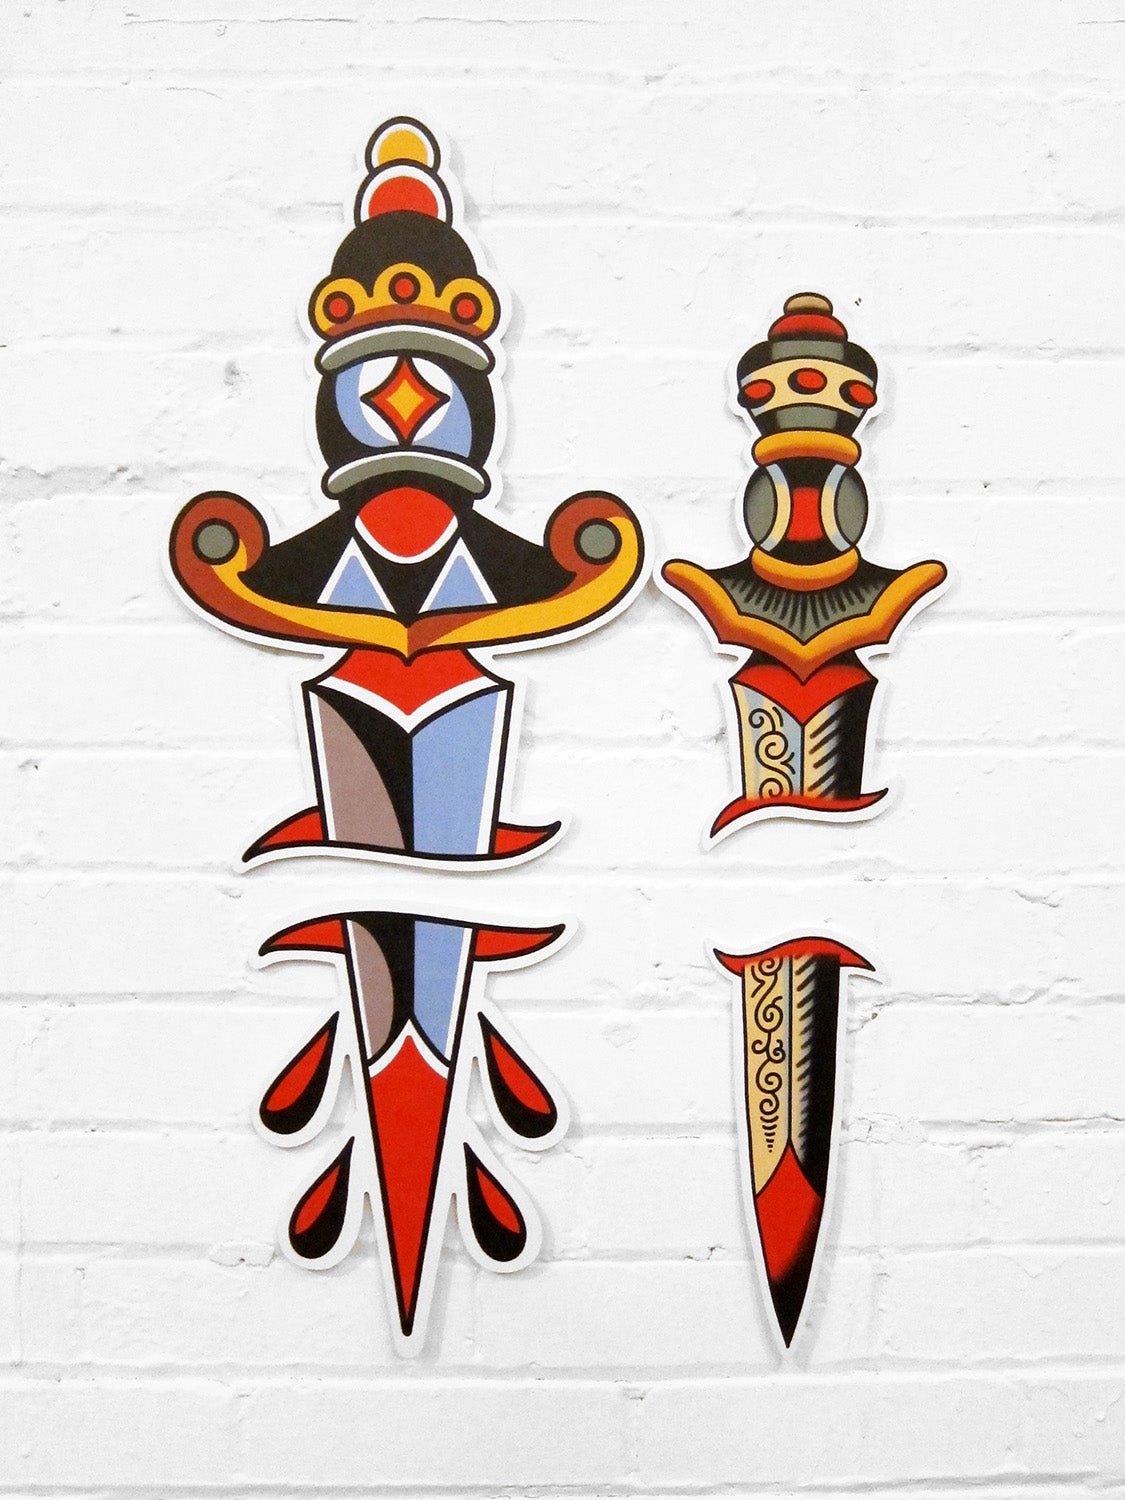 Image features the "No Fun®" sword, and dagger PVC signs which were designed in collaboration with Brandon Ing.  They are two part signs where one half is the blade, while the other is the handle.  The designs are based off of traditional tattoo flash artwork.  The photo features the products against a white brick wall.  